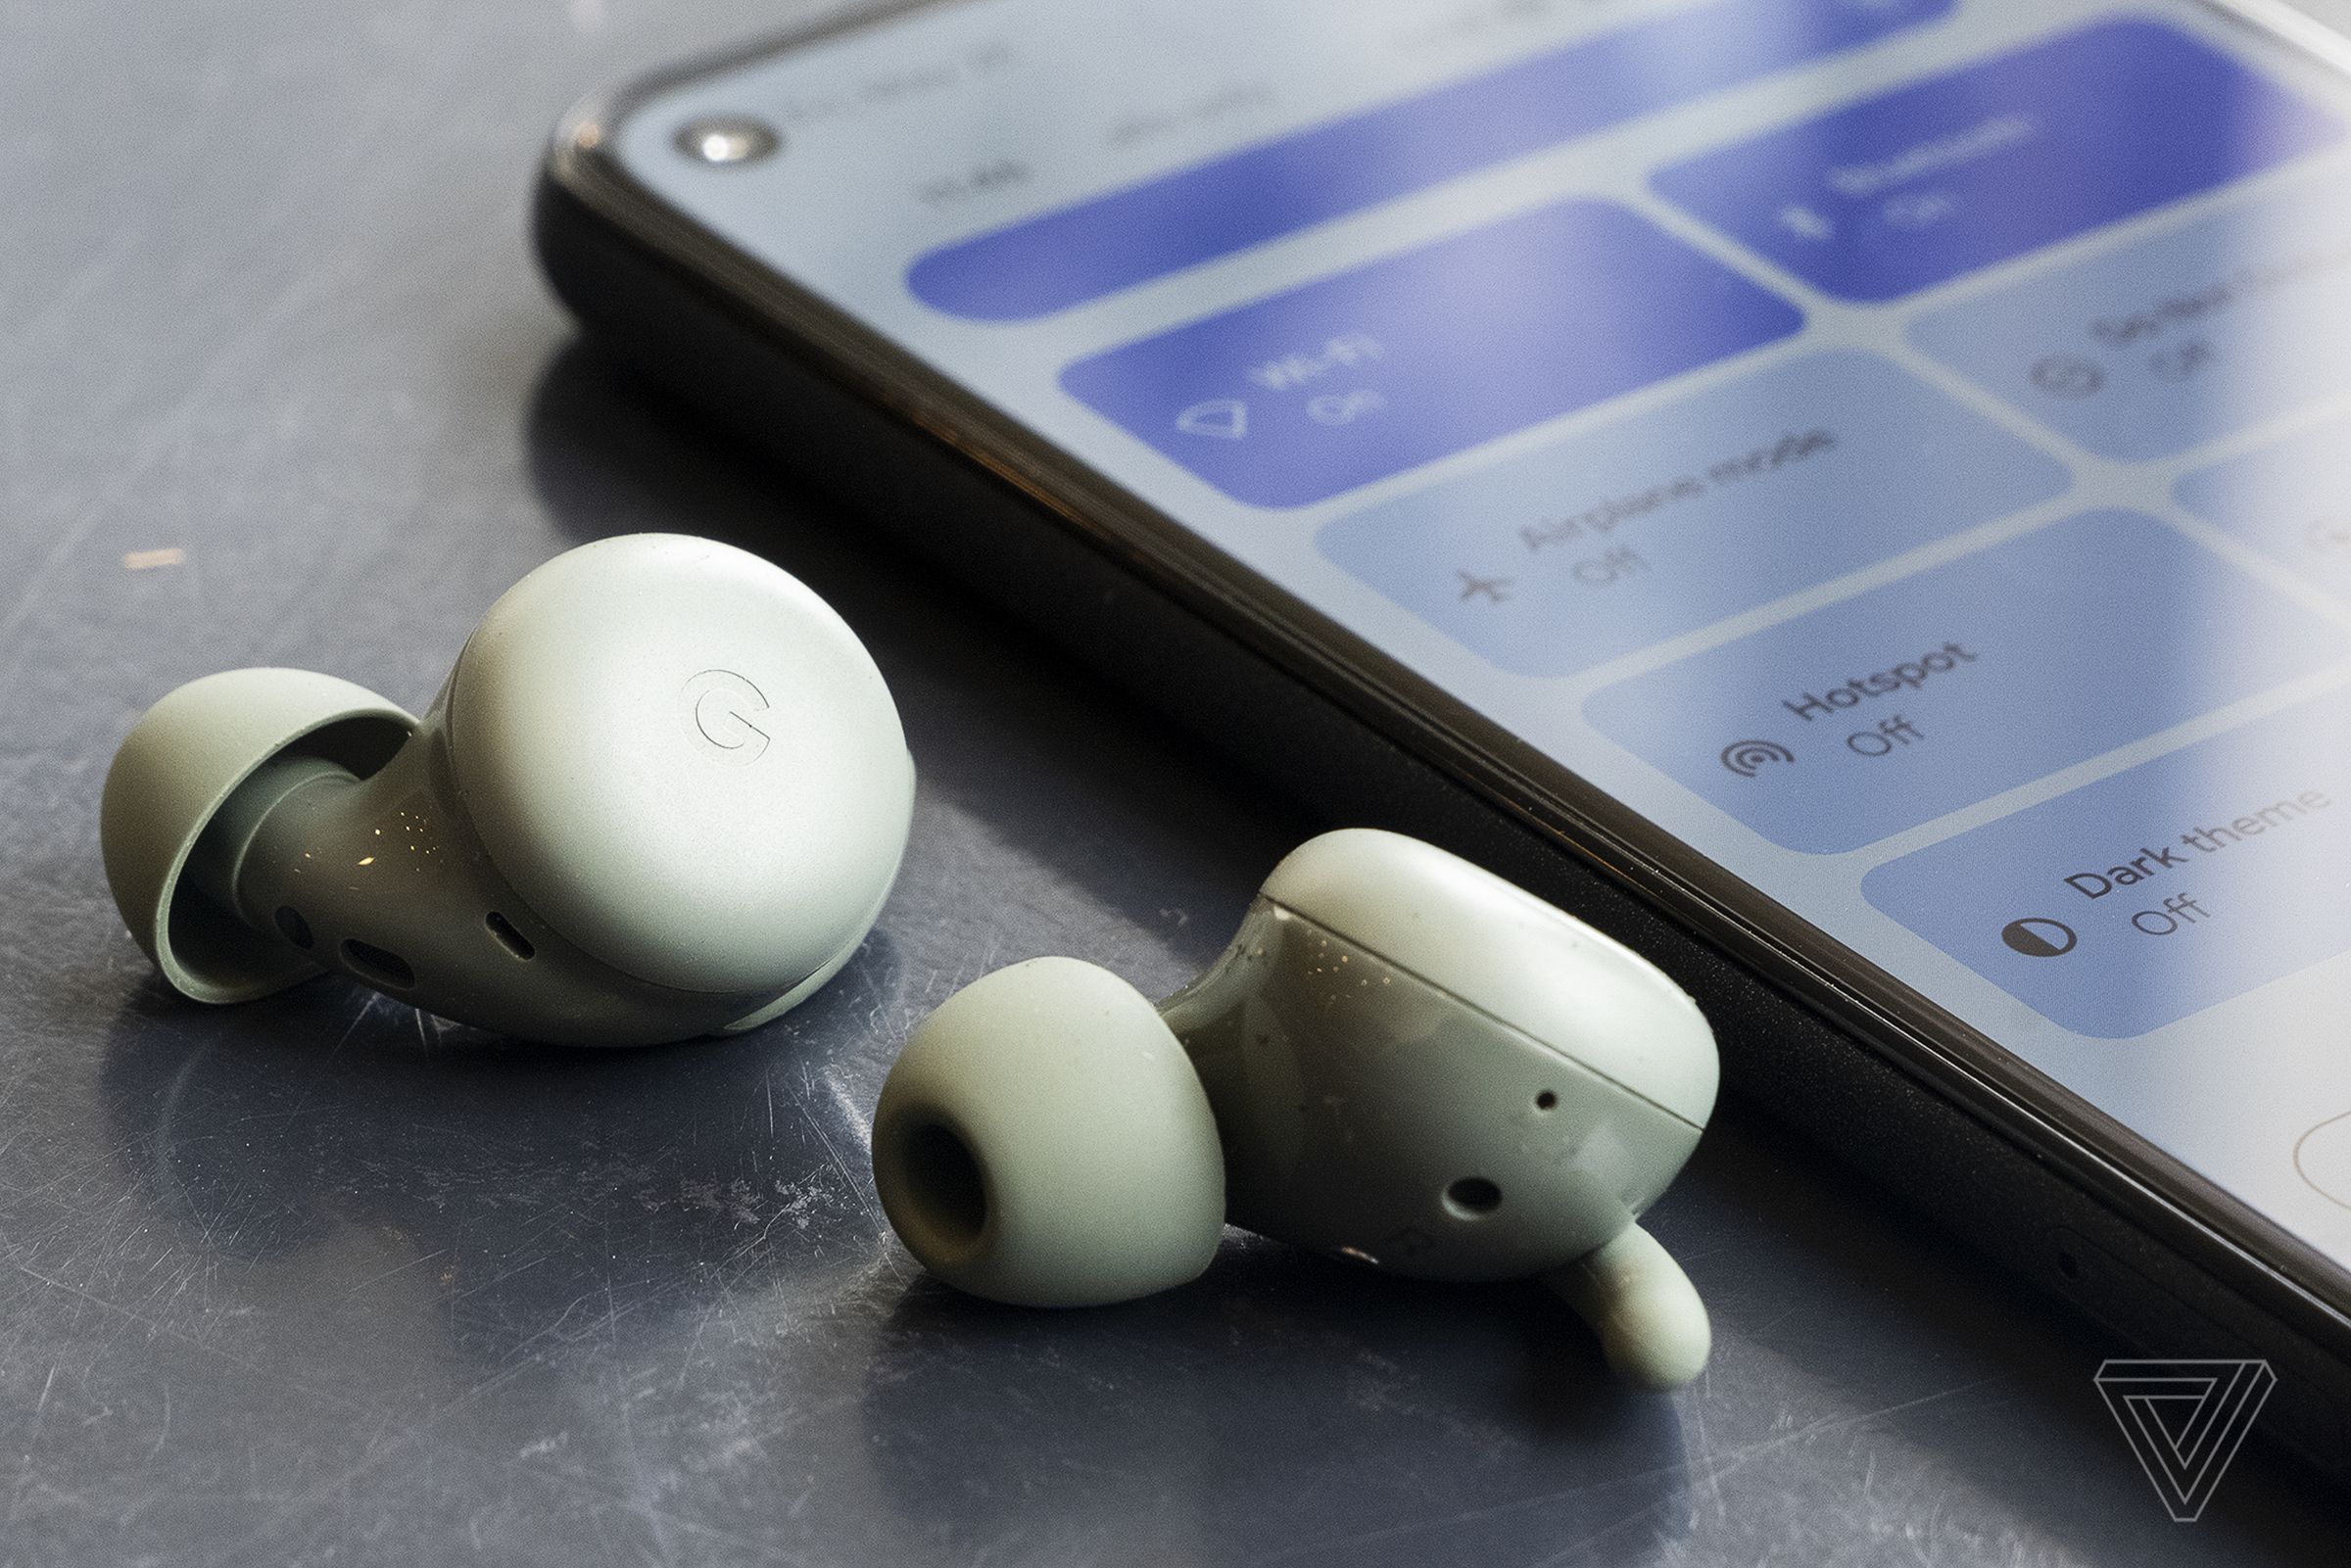 The Pixel Buds A-Series can easily connect to Android phones with Fast Pair.